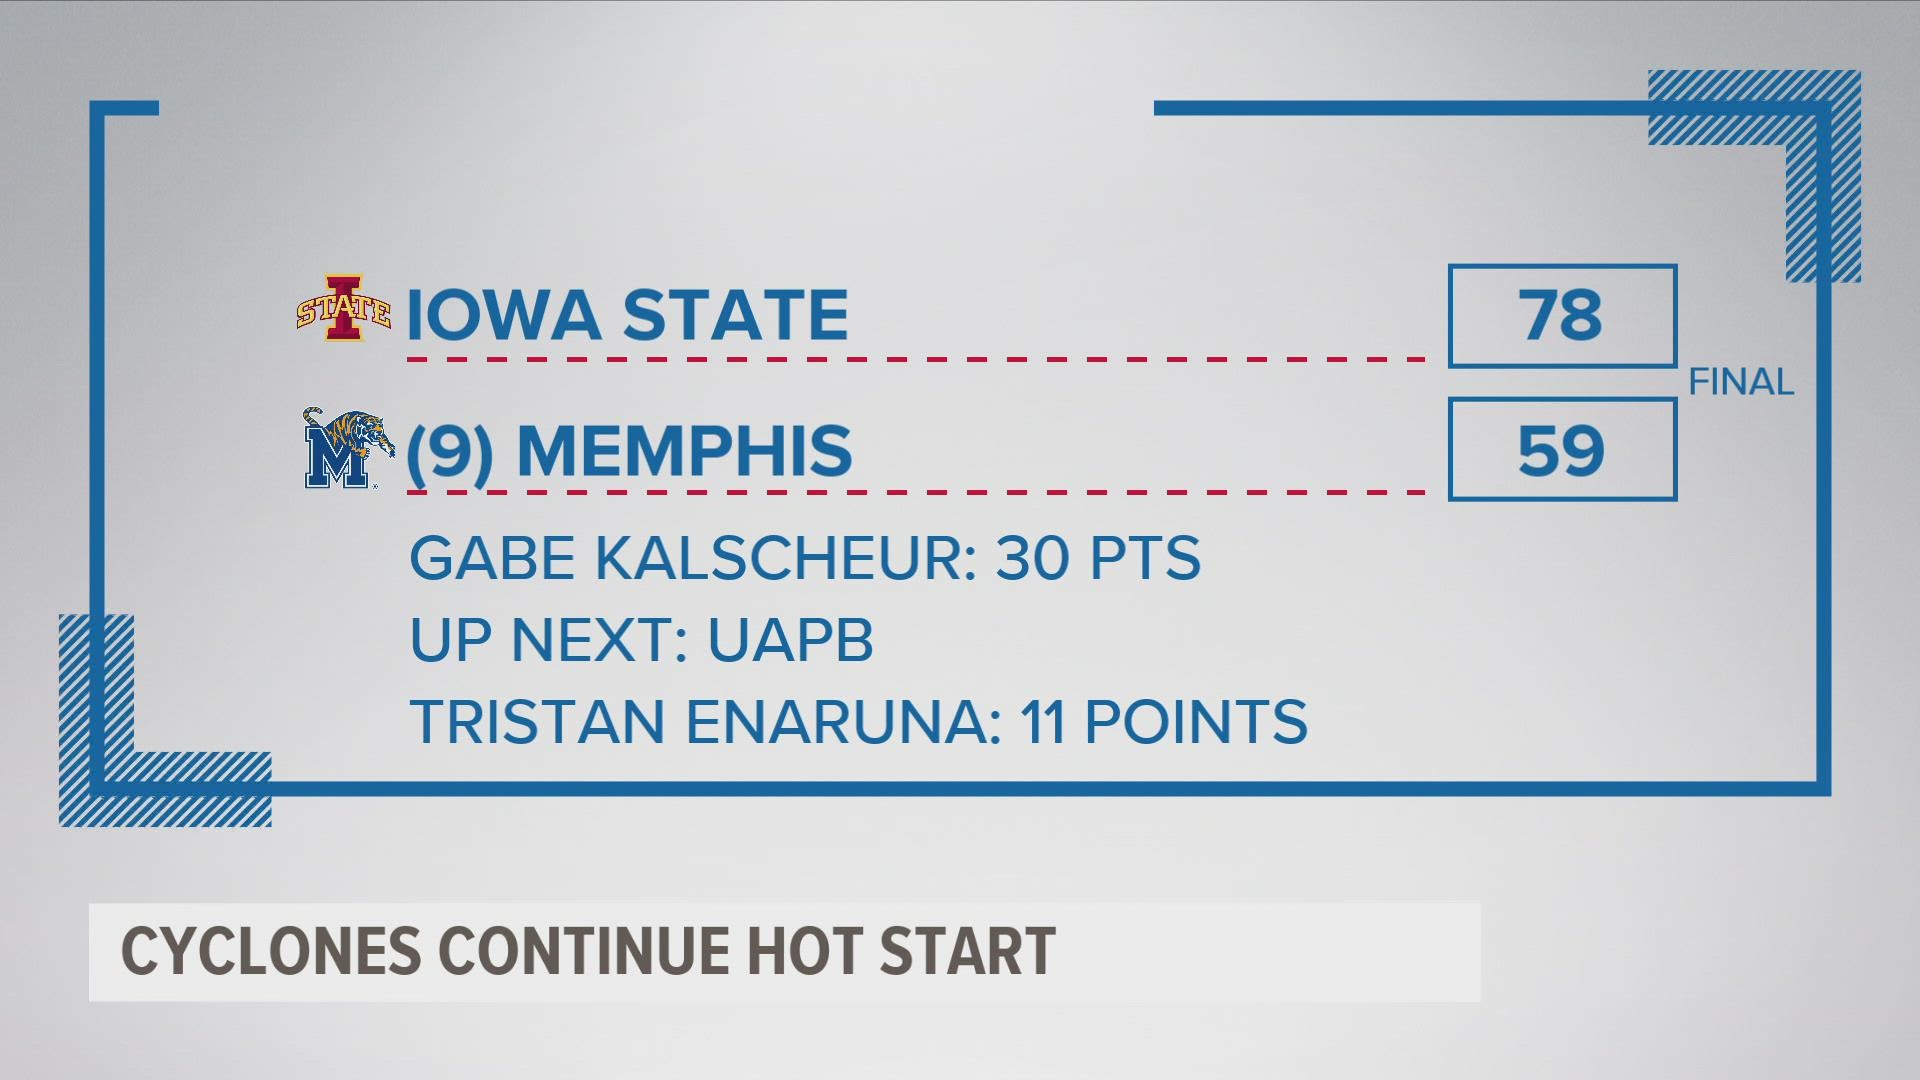 Gabe Kalscheur scored 30 points and led Iowa State to defeat No. 9 Memphis in the championship game of the NIT Season Tip-Off.